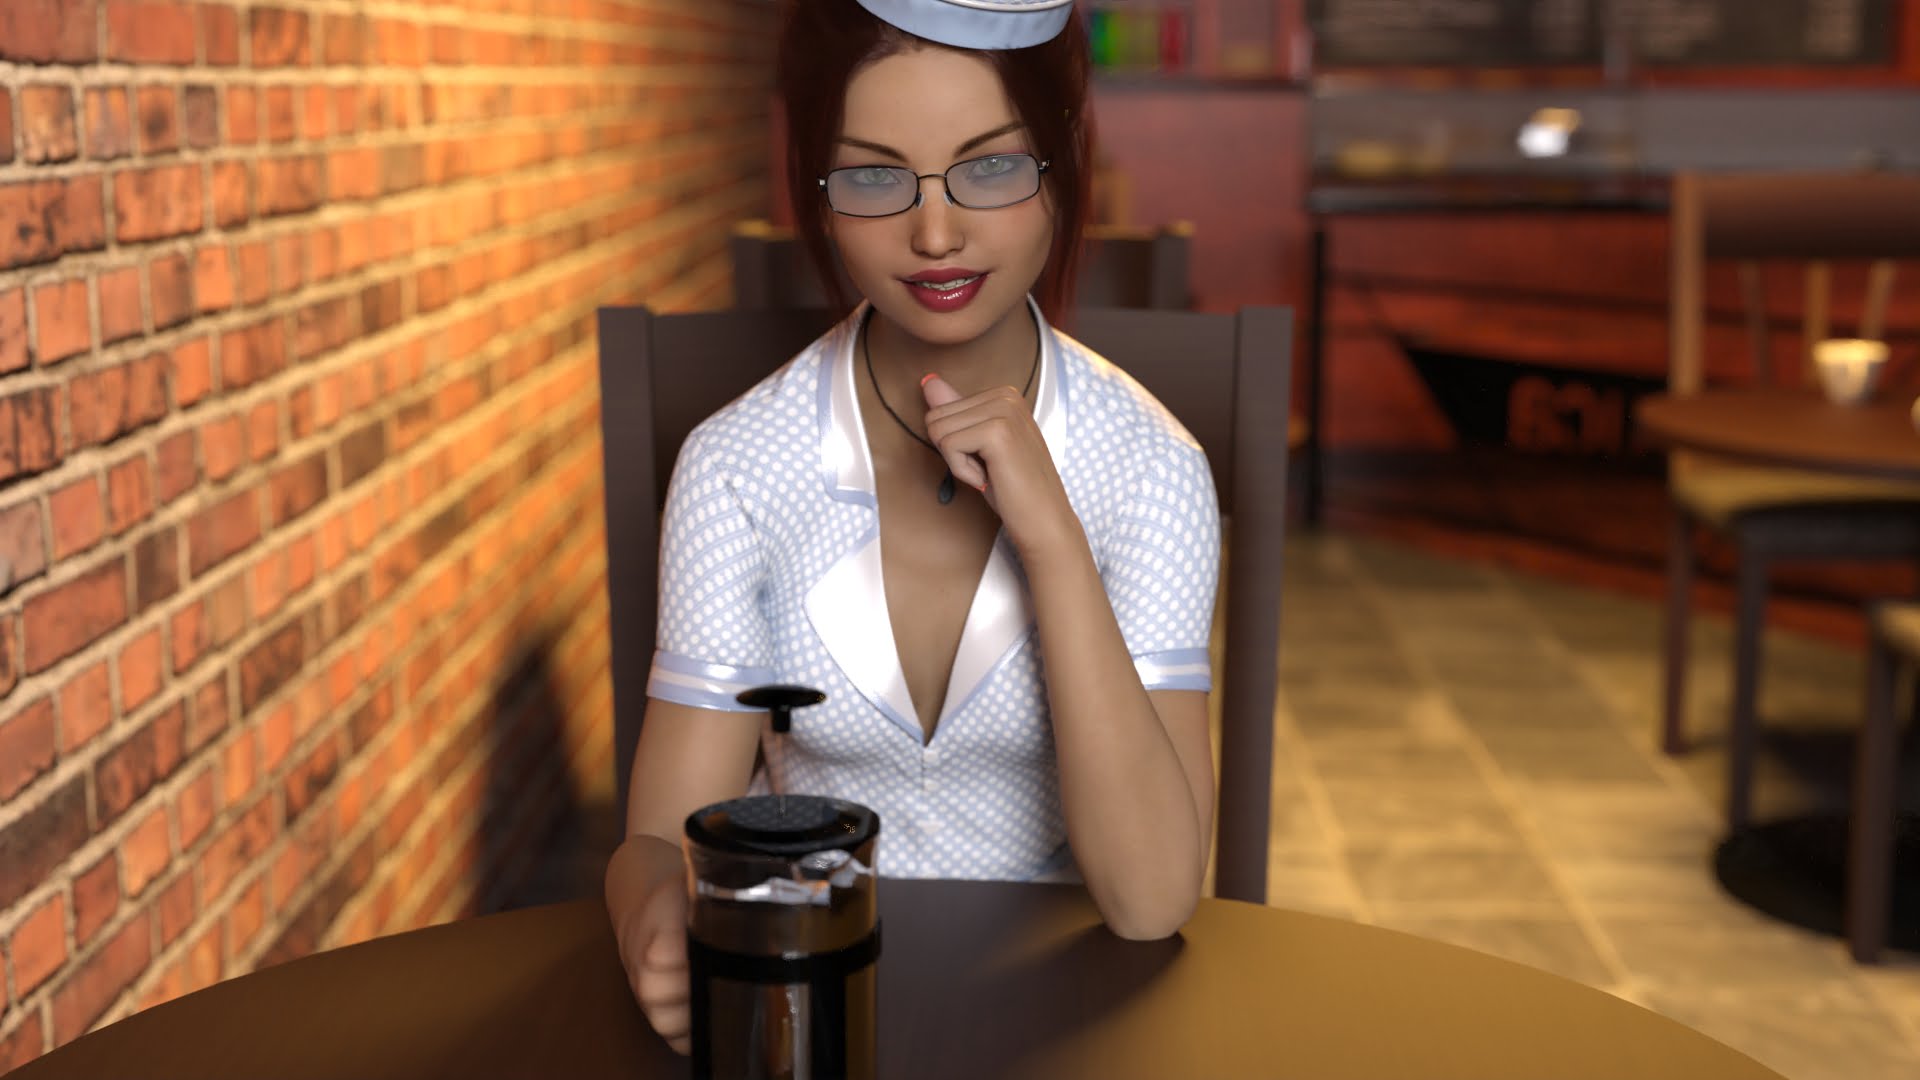 3D image of a waitress girl sitting in a bar